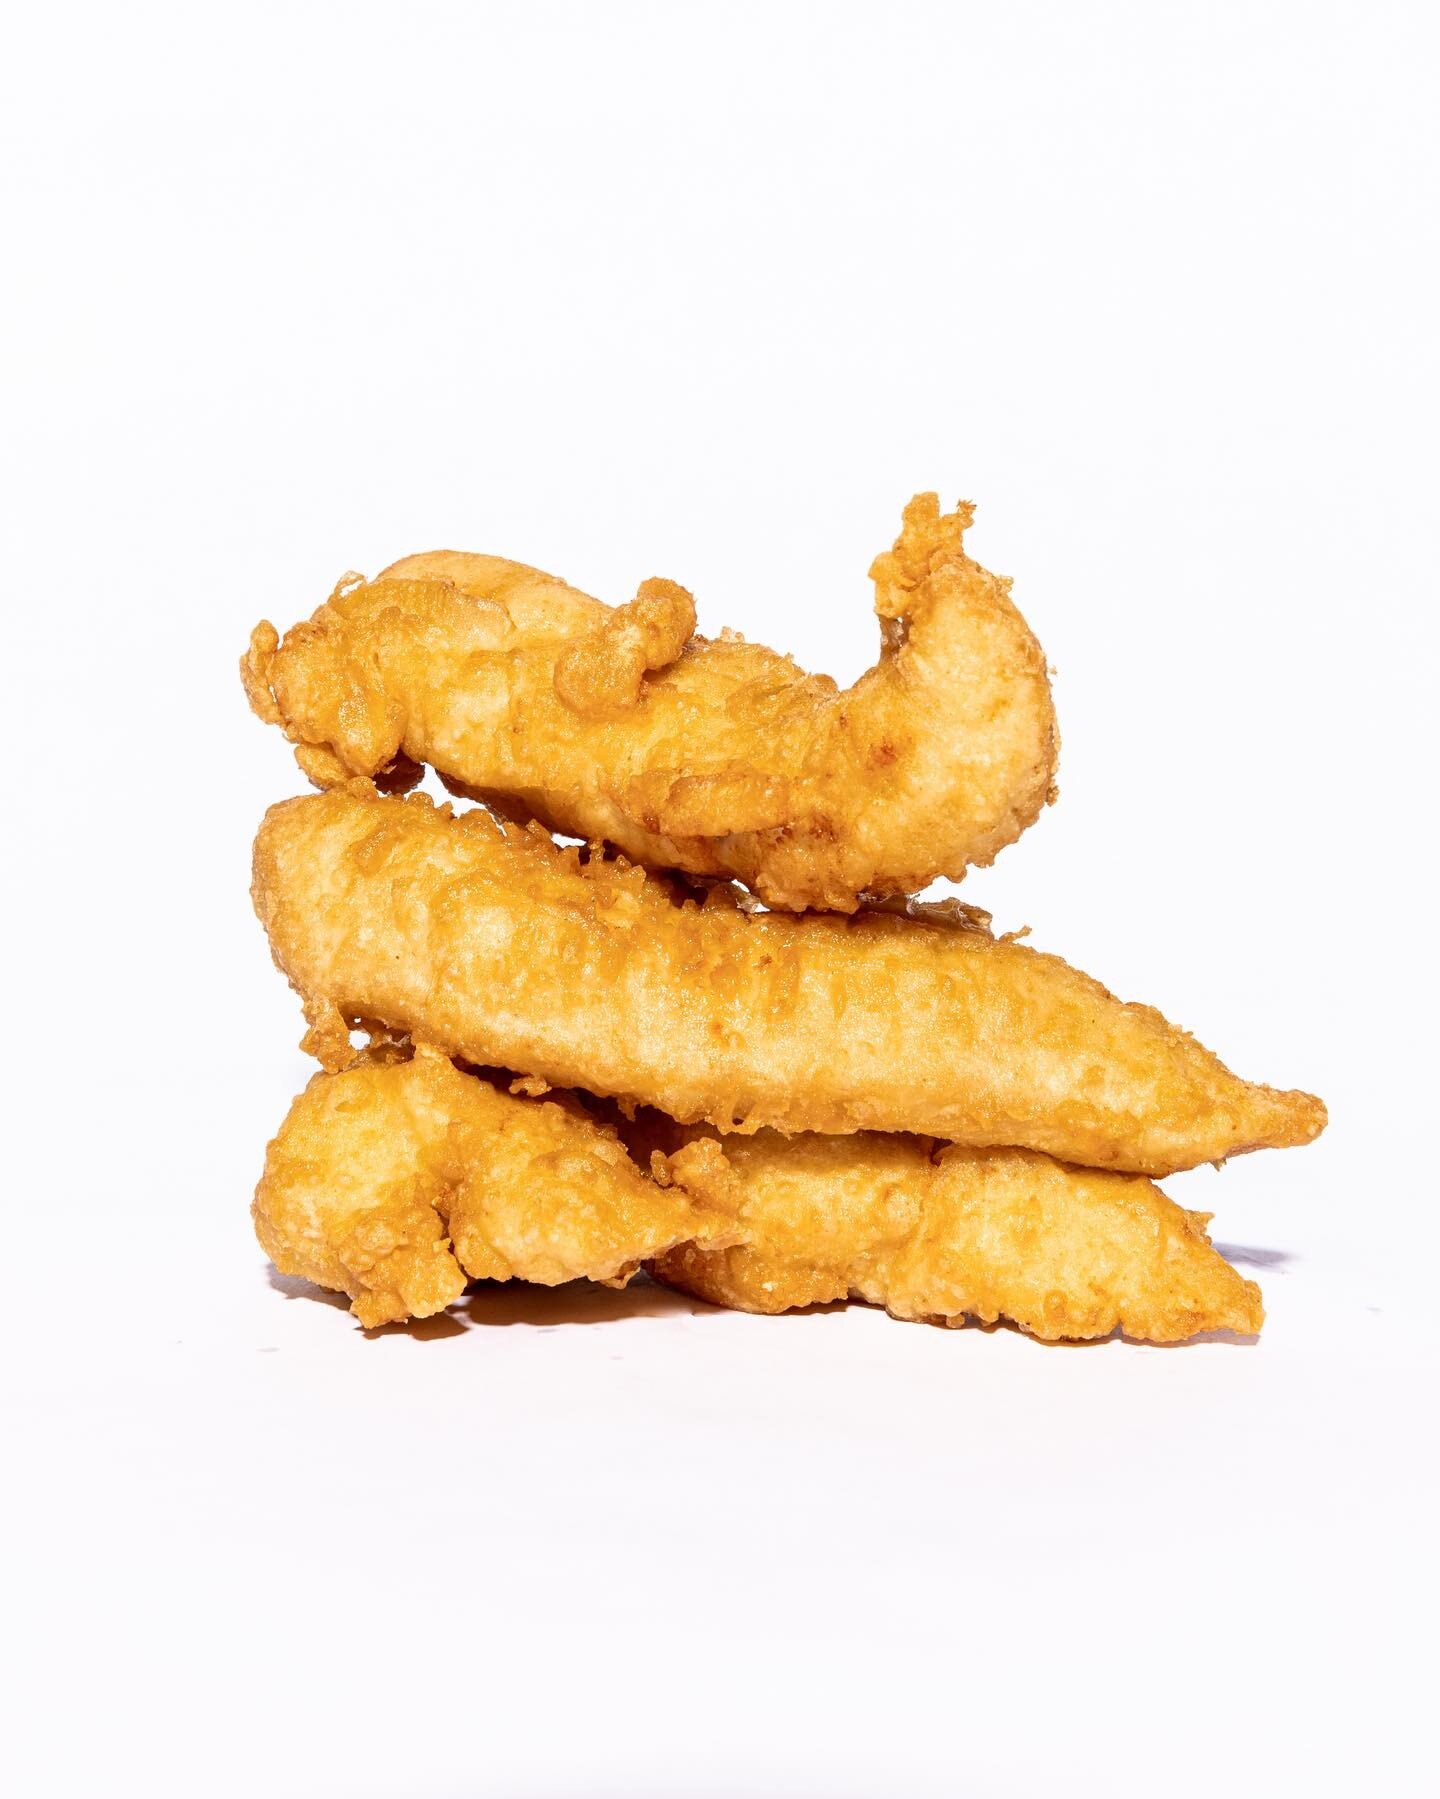 Are you a ✨Plain Jane✨ or ✨Don&rsquo;t Skip the Dip✨ kinda person when it comes to chicken fingers? 

Did you know our chicken fingers are hand-battered per order? Meaning they are freshly made for each order!

Stop by and try them out! #youllcraveit